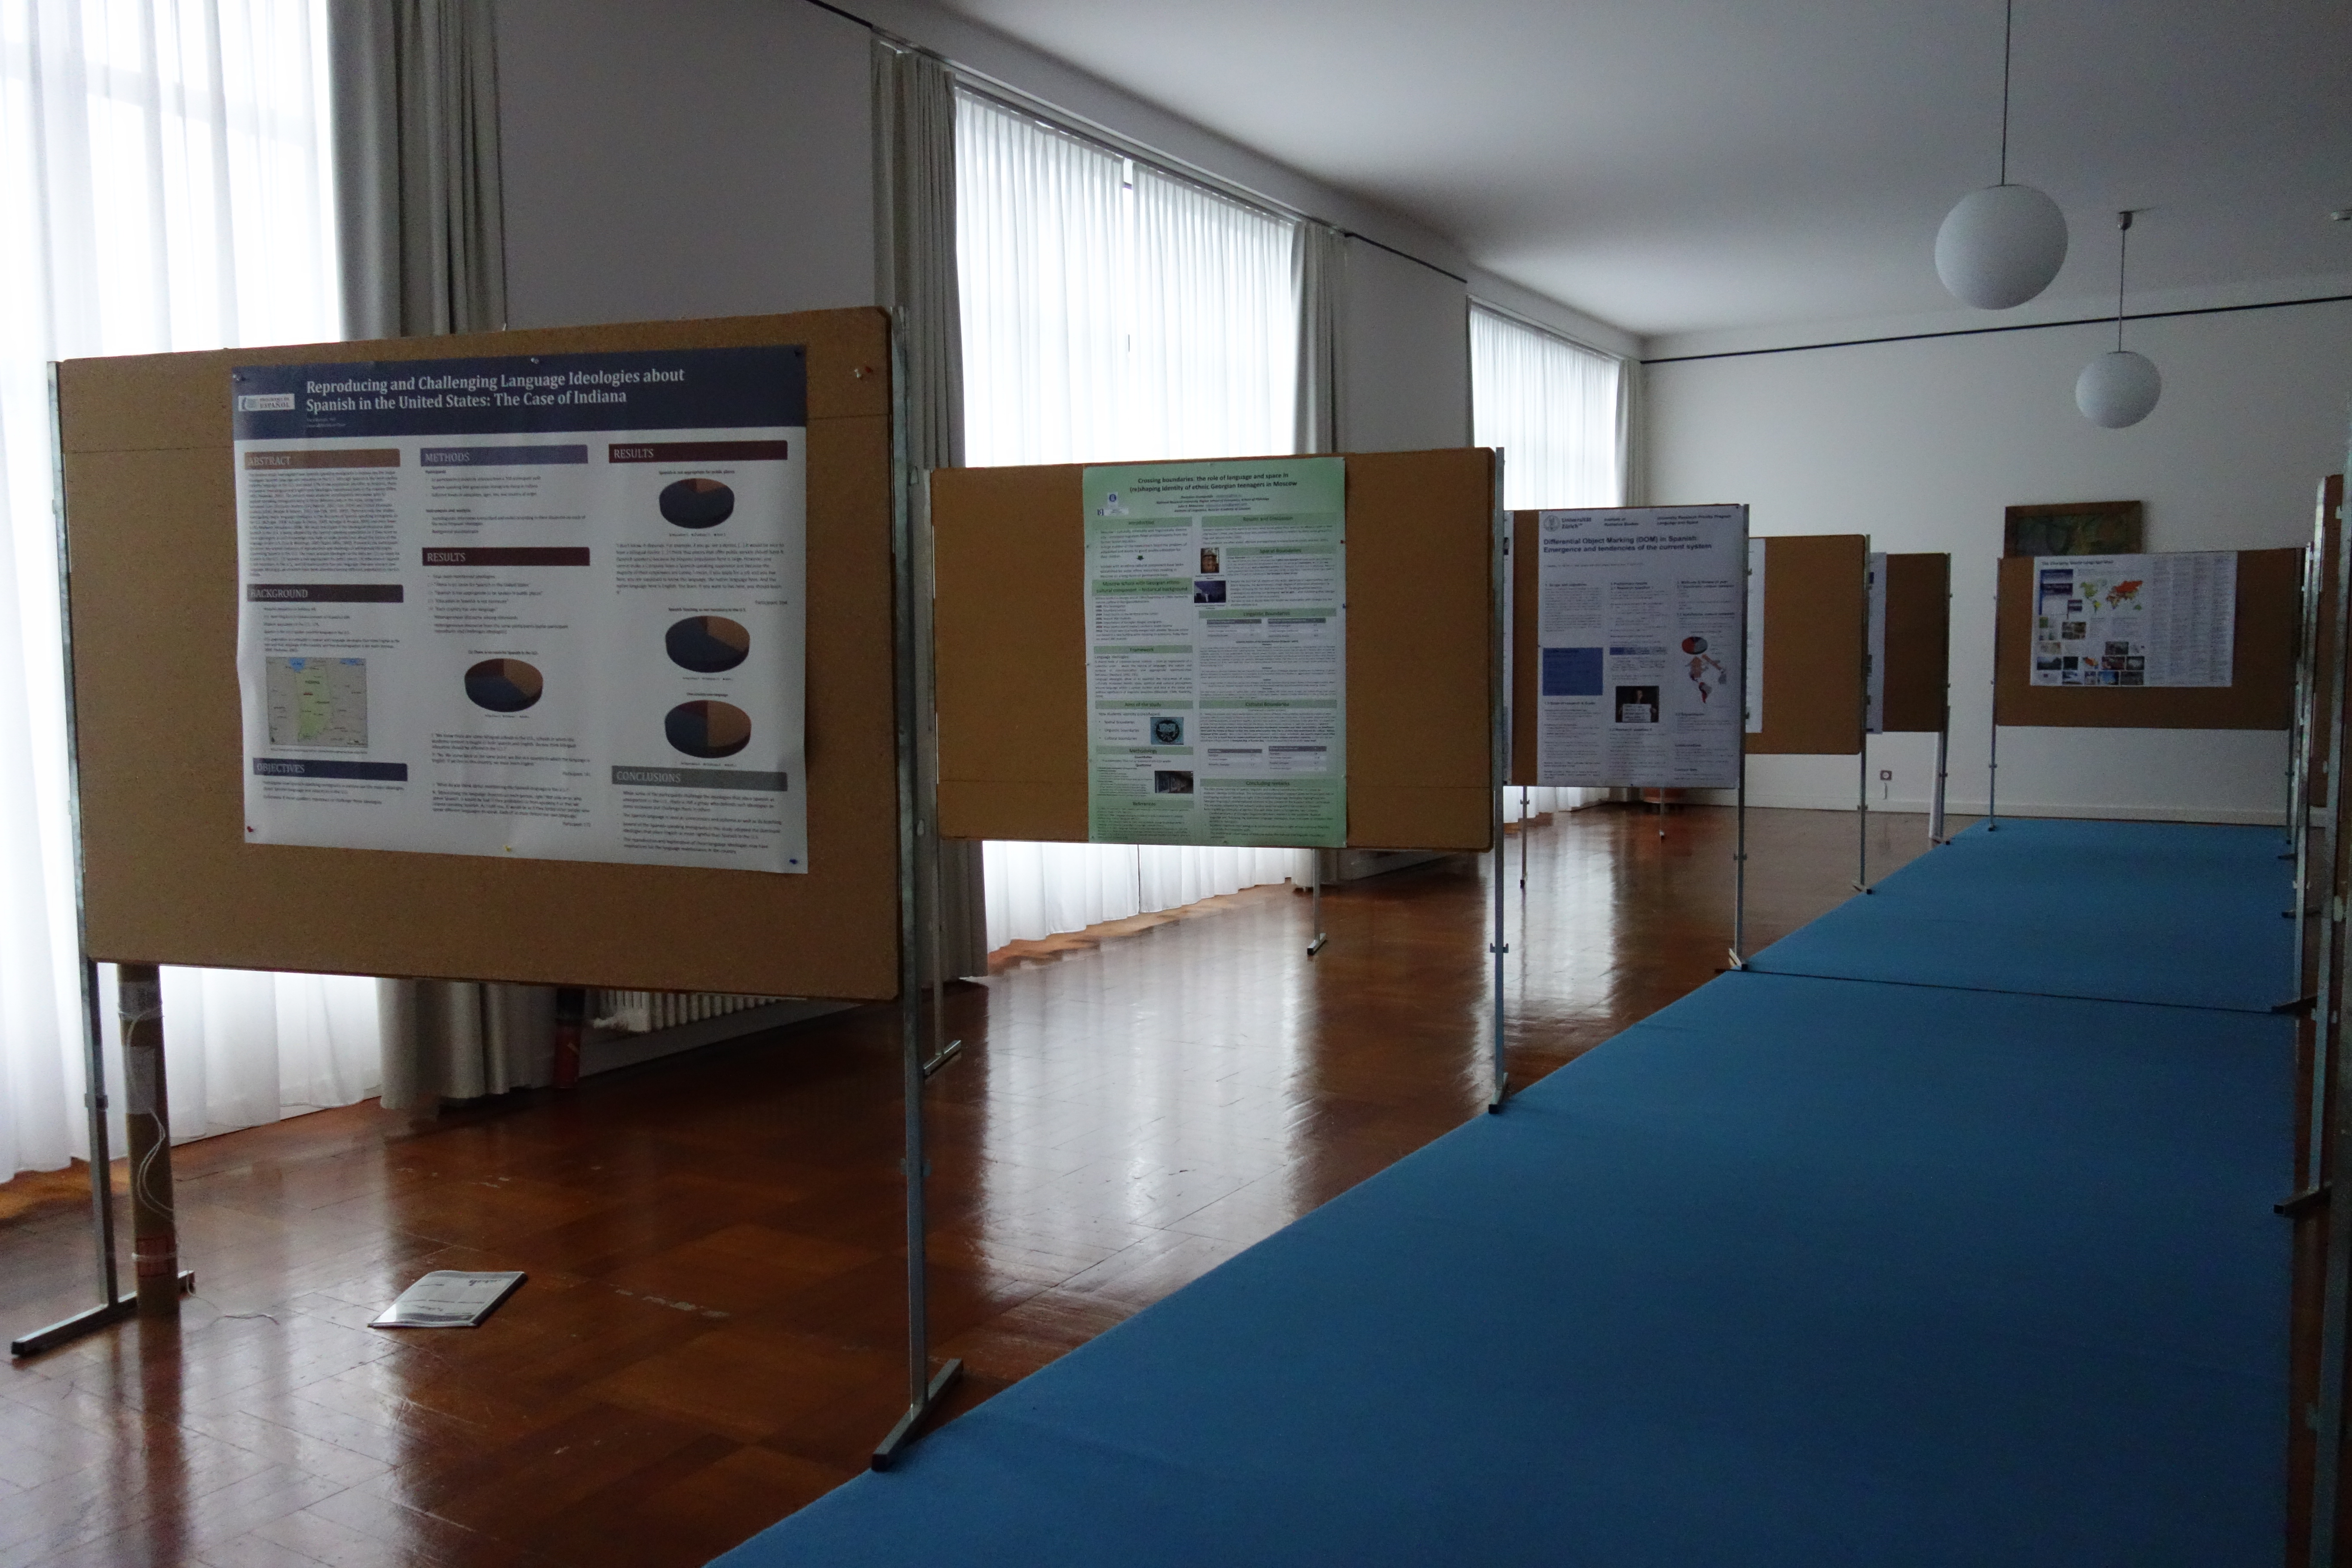 Postersession